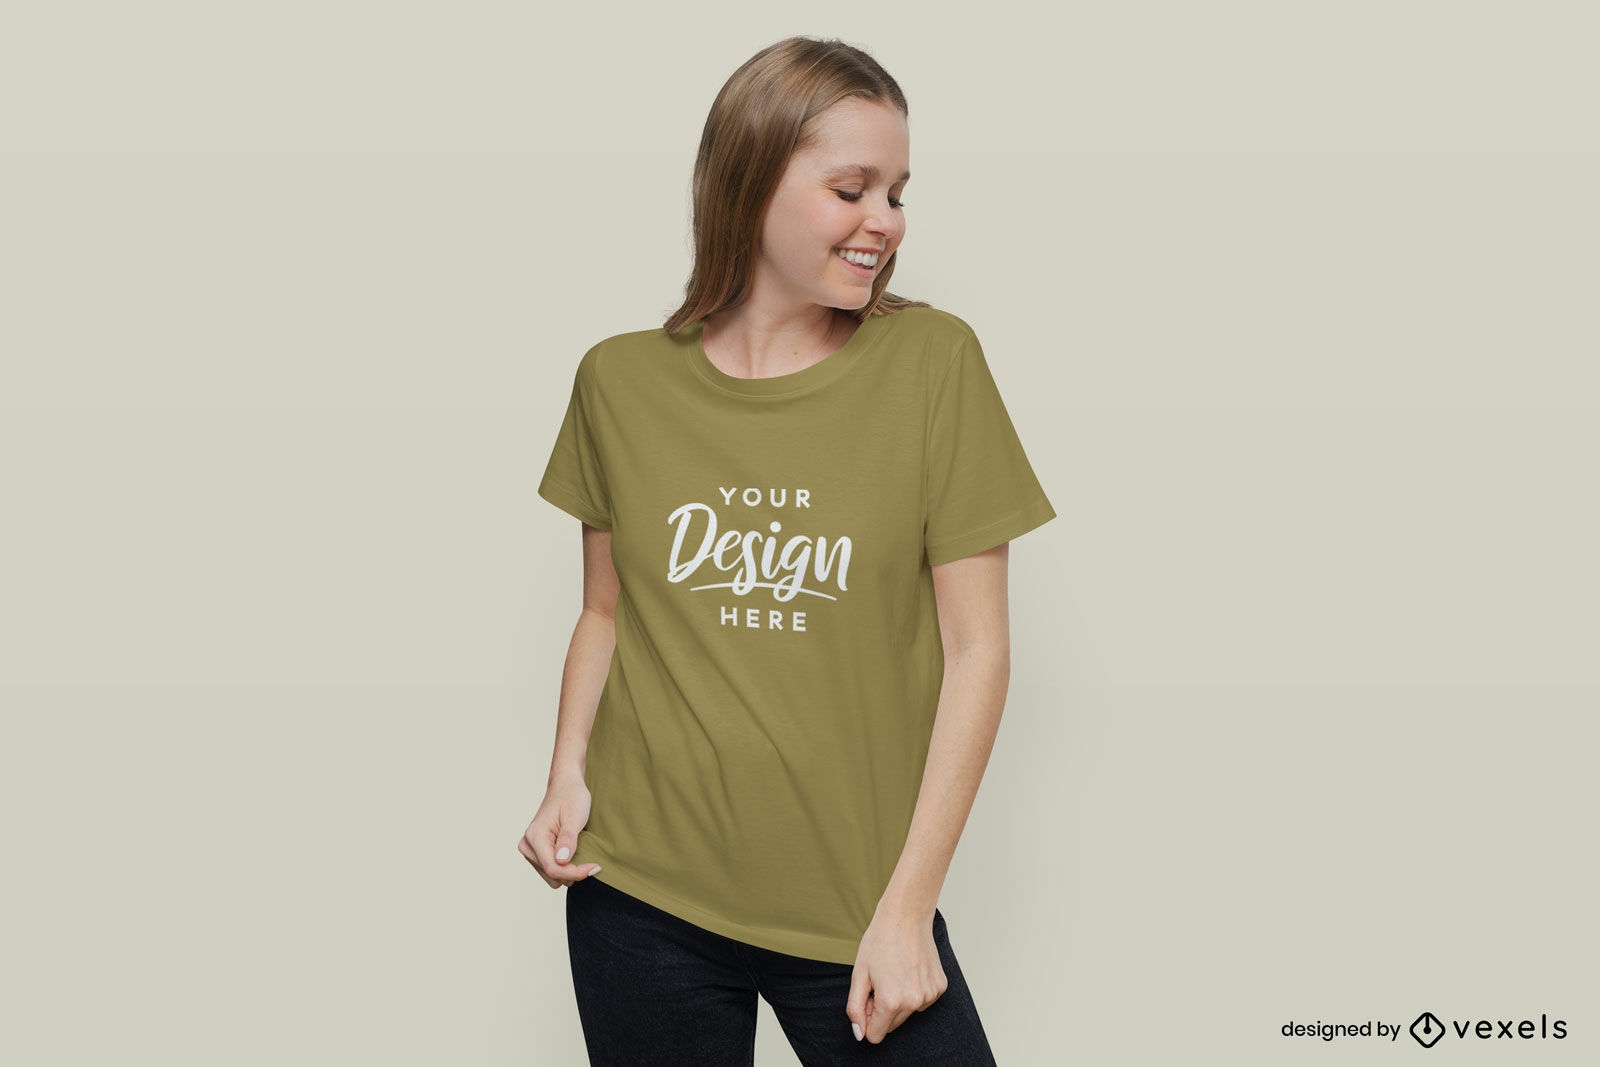 Woman smiling in solid background t-shirt mockup